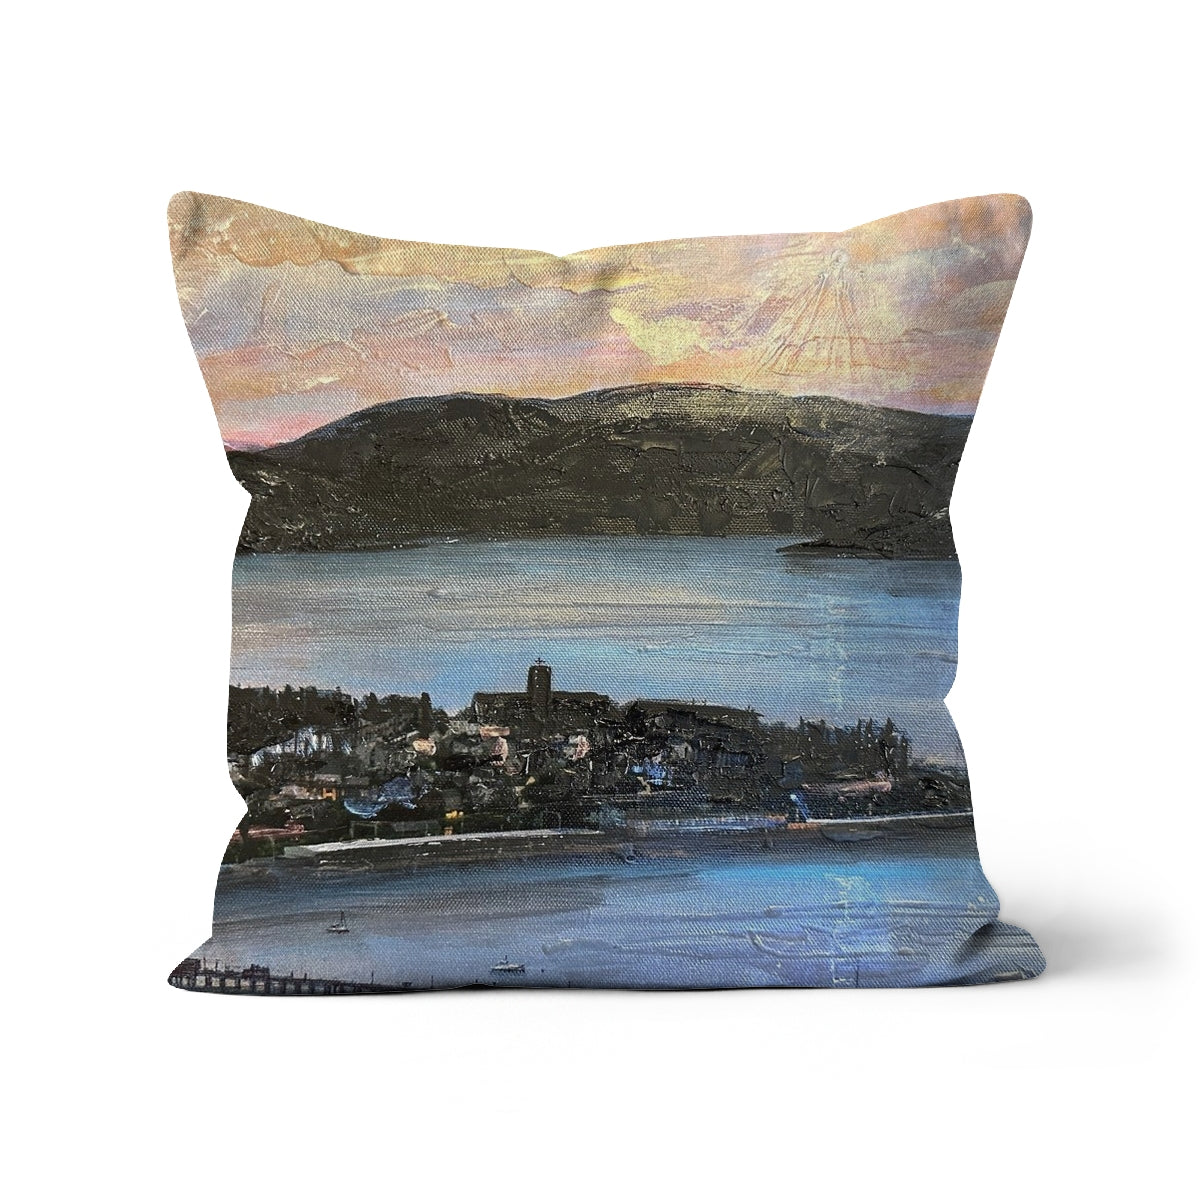 From Lyle Hill Art Gifts Cushion